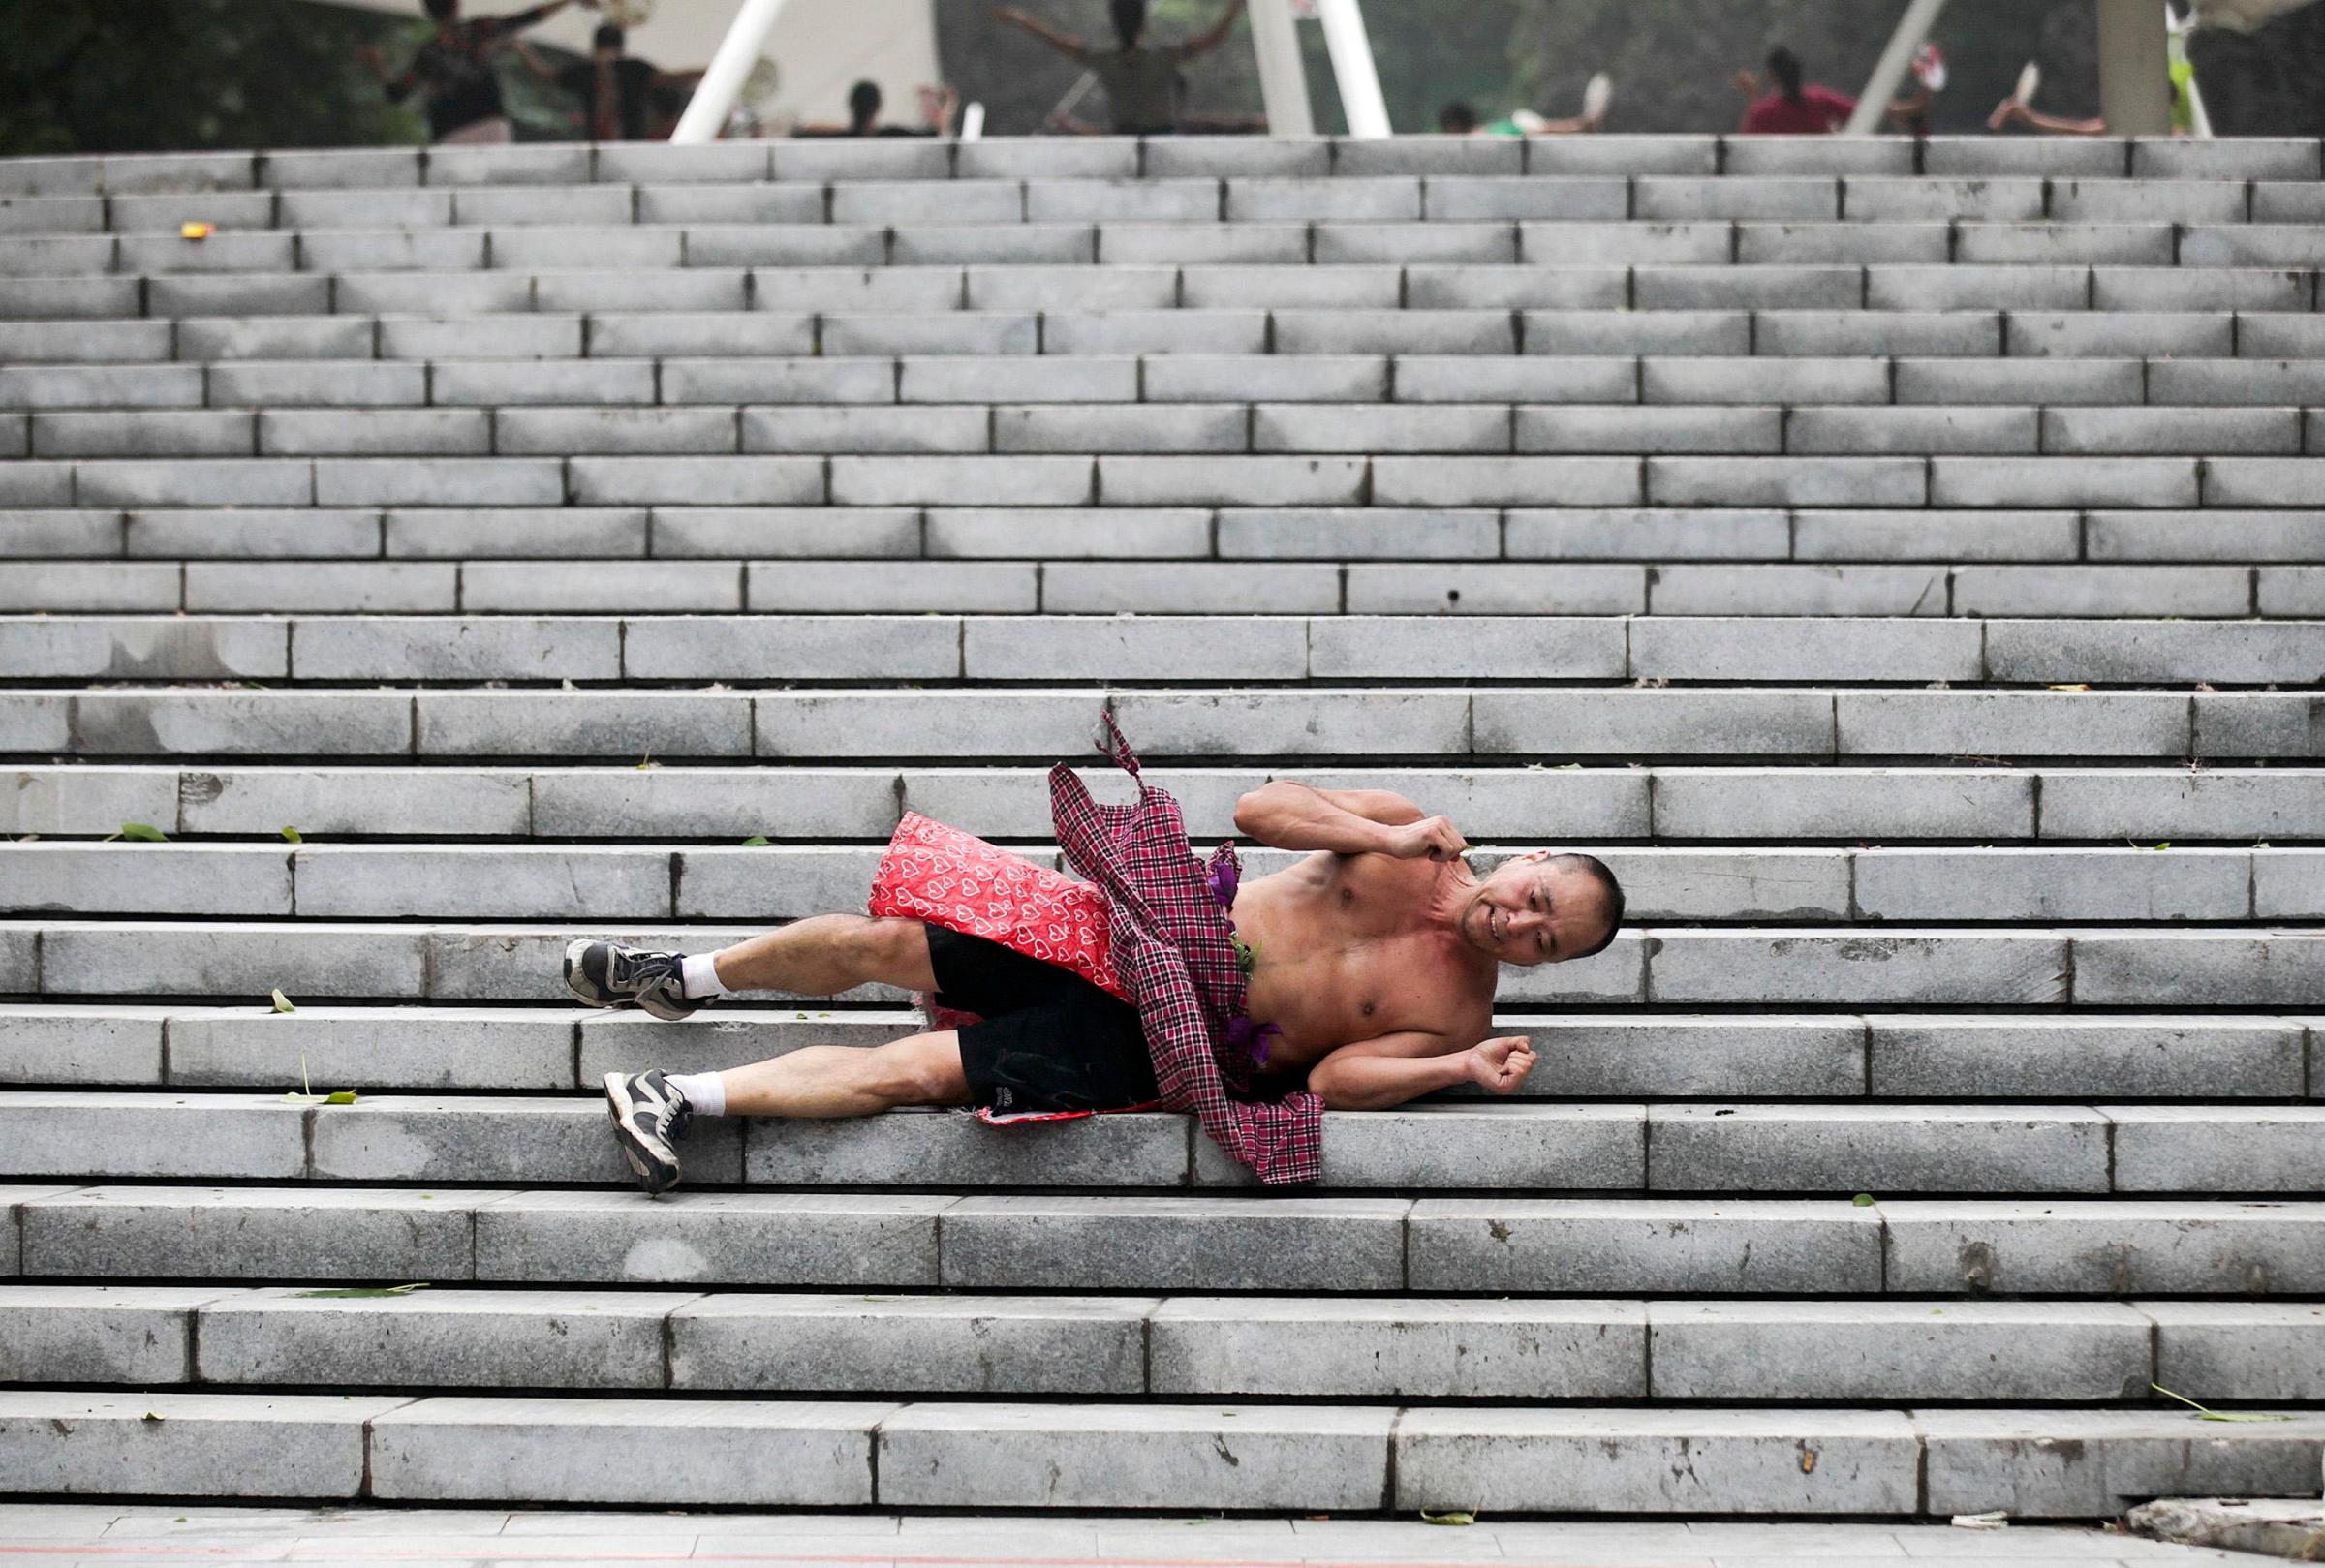 Li Zhiheng, an amateur athlete, holds up his hands as he rolls down a stairway during a morning exercise at a park in Xi'an, Shaanxi province on Sept. 11, 2014.